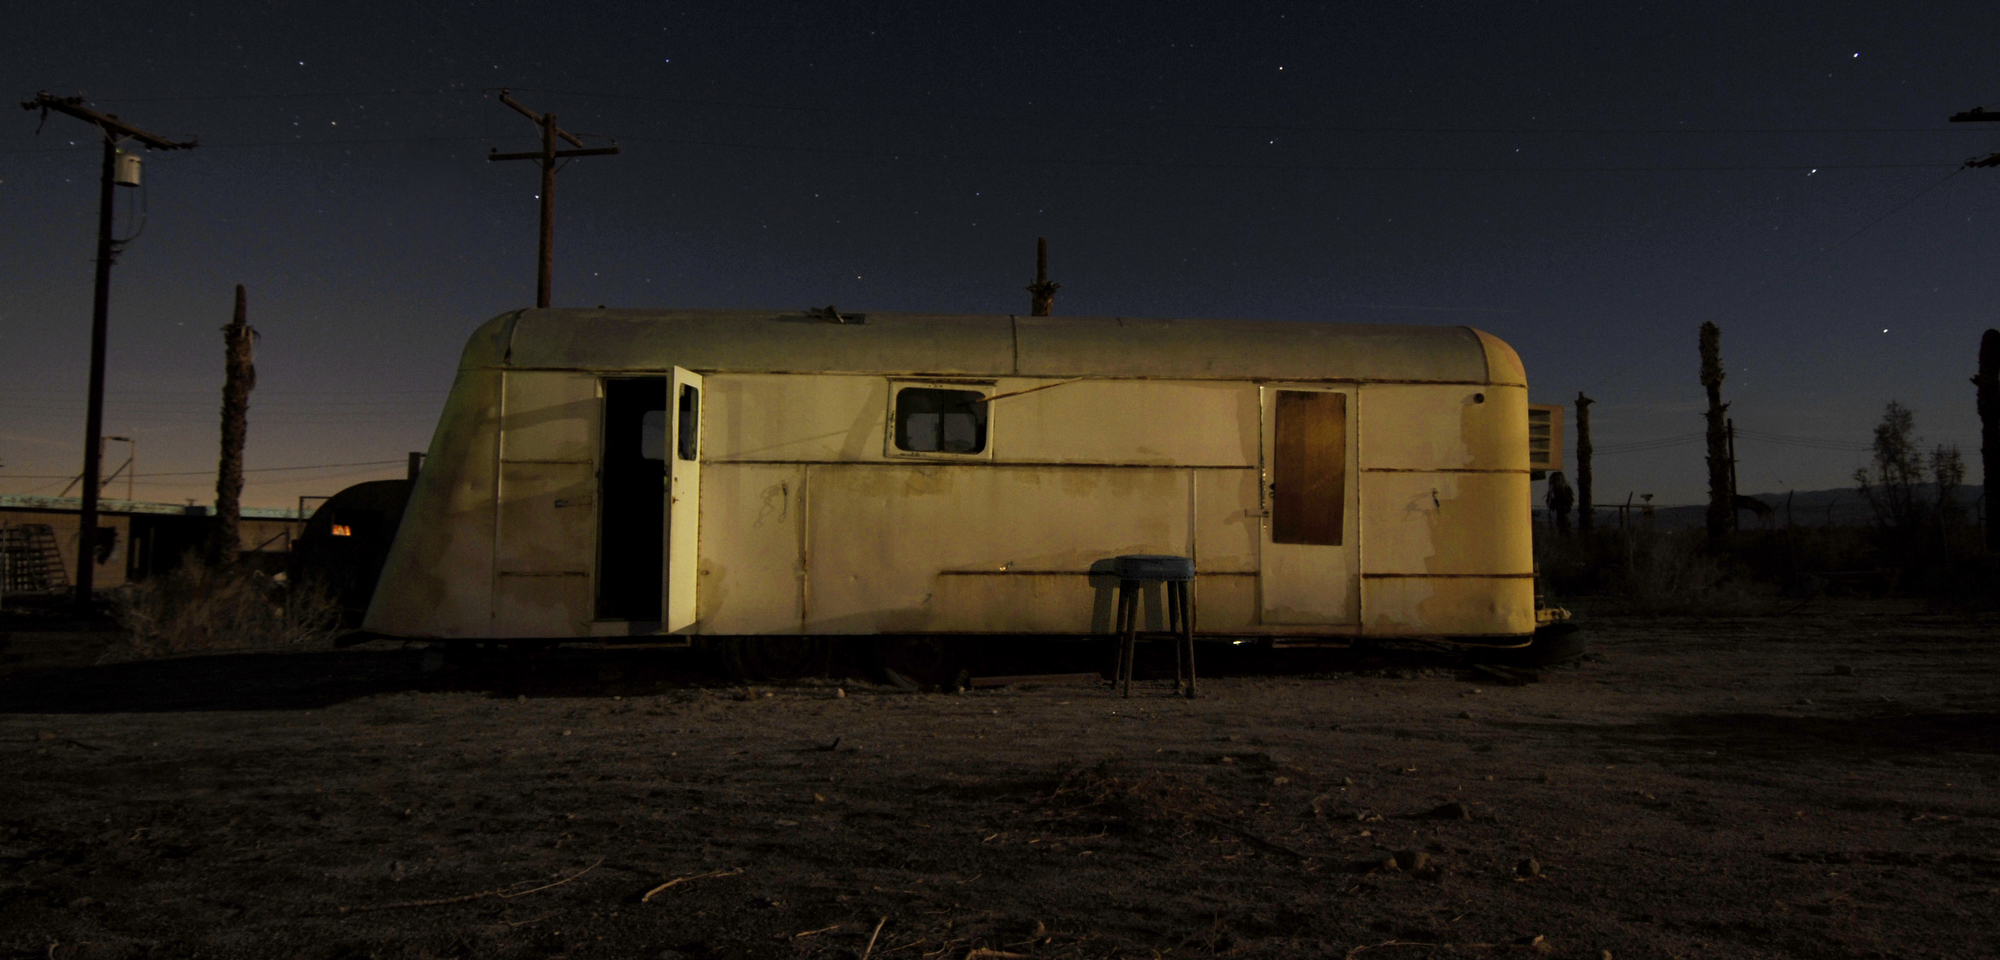 Salton Sea Beach. Photo taken between 1999-2010. I tried to find this trailer but without luck. 